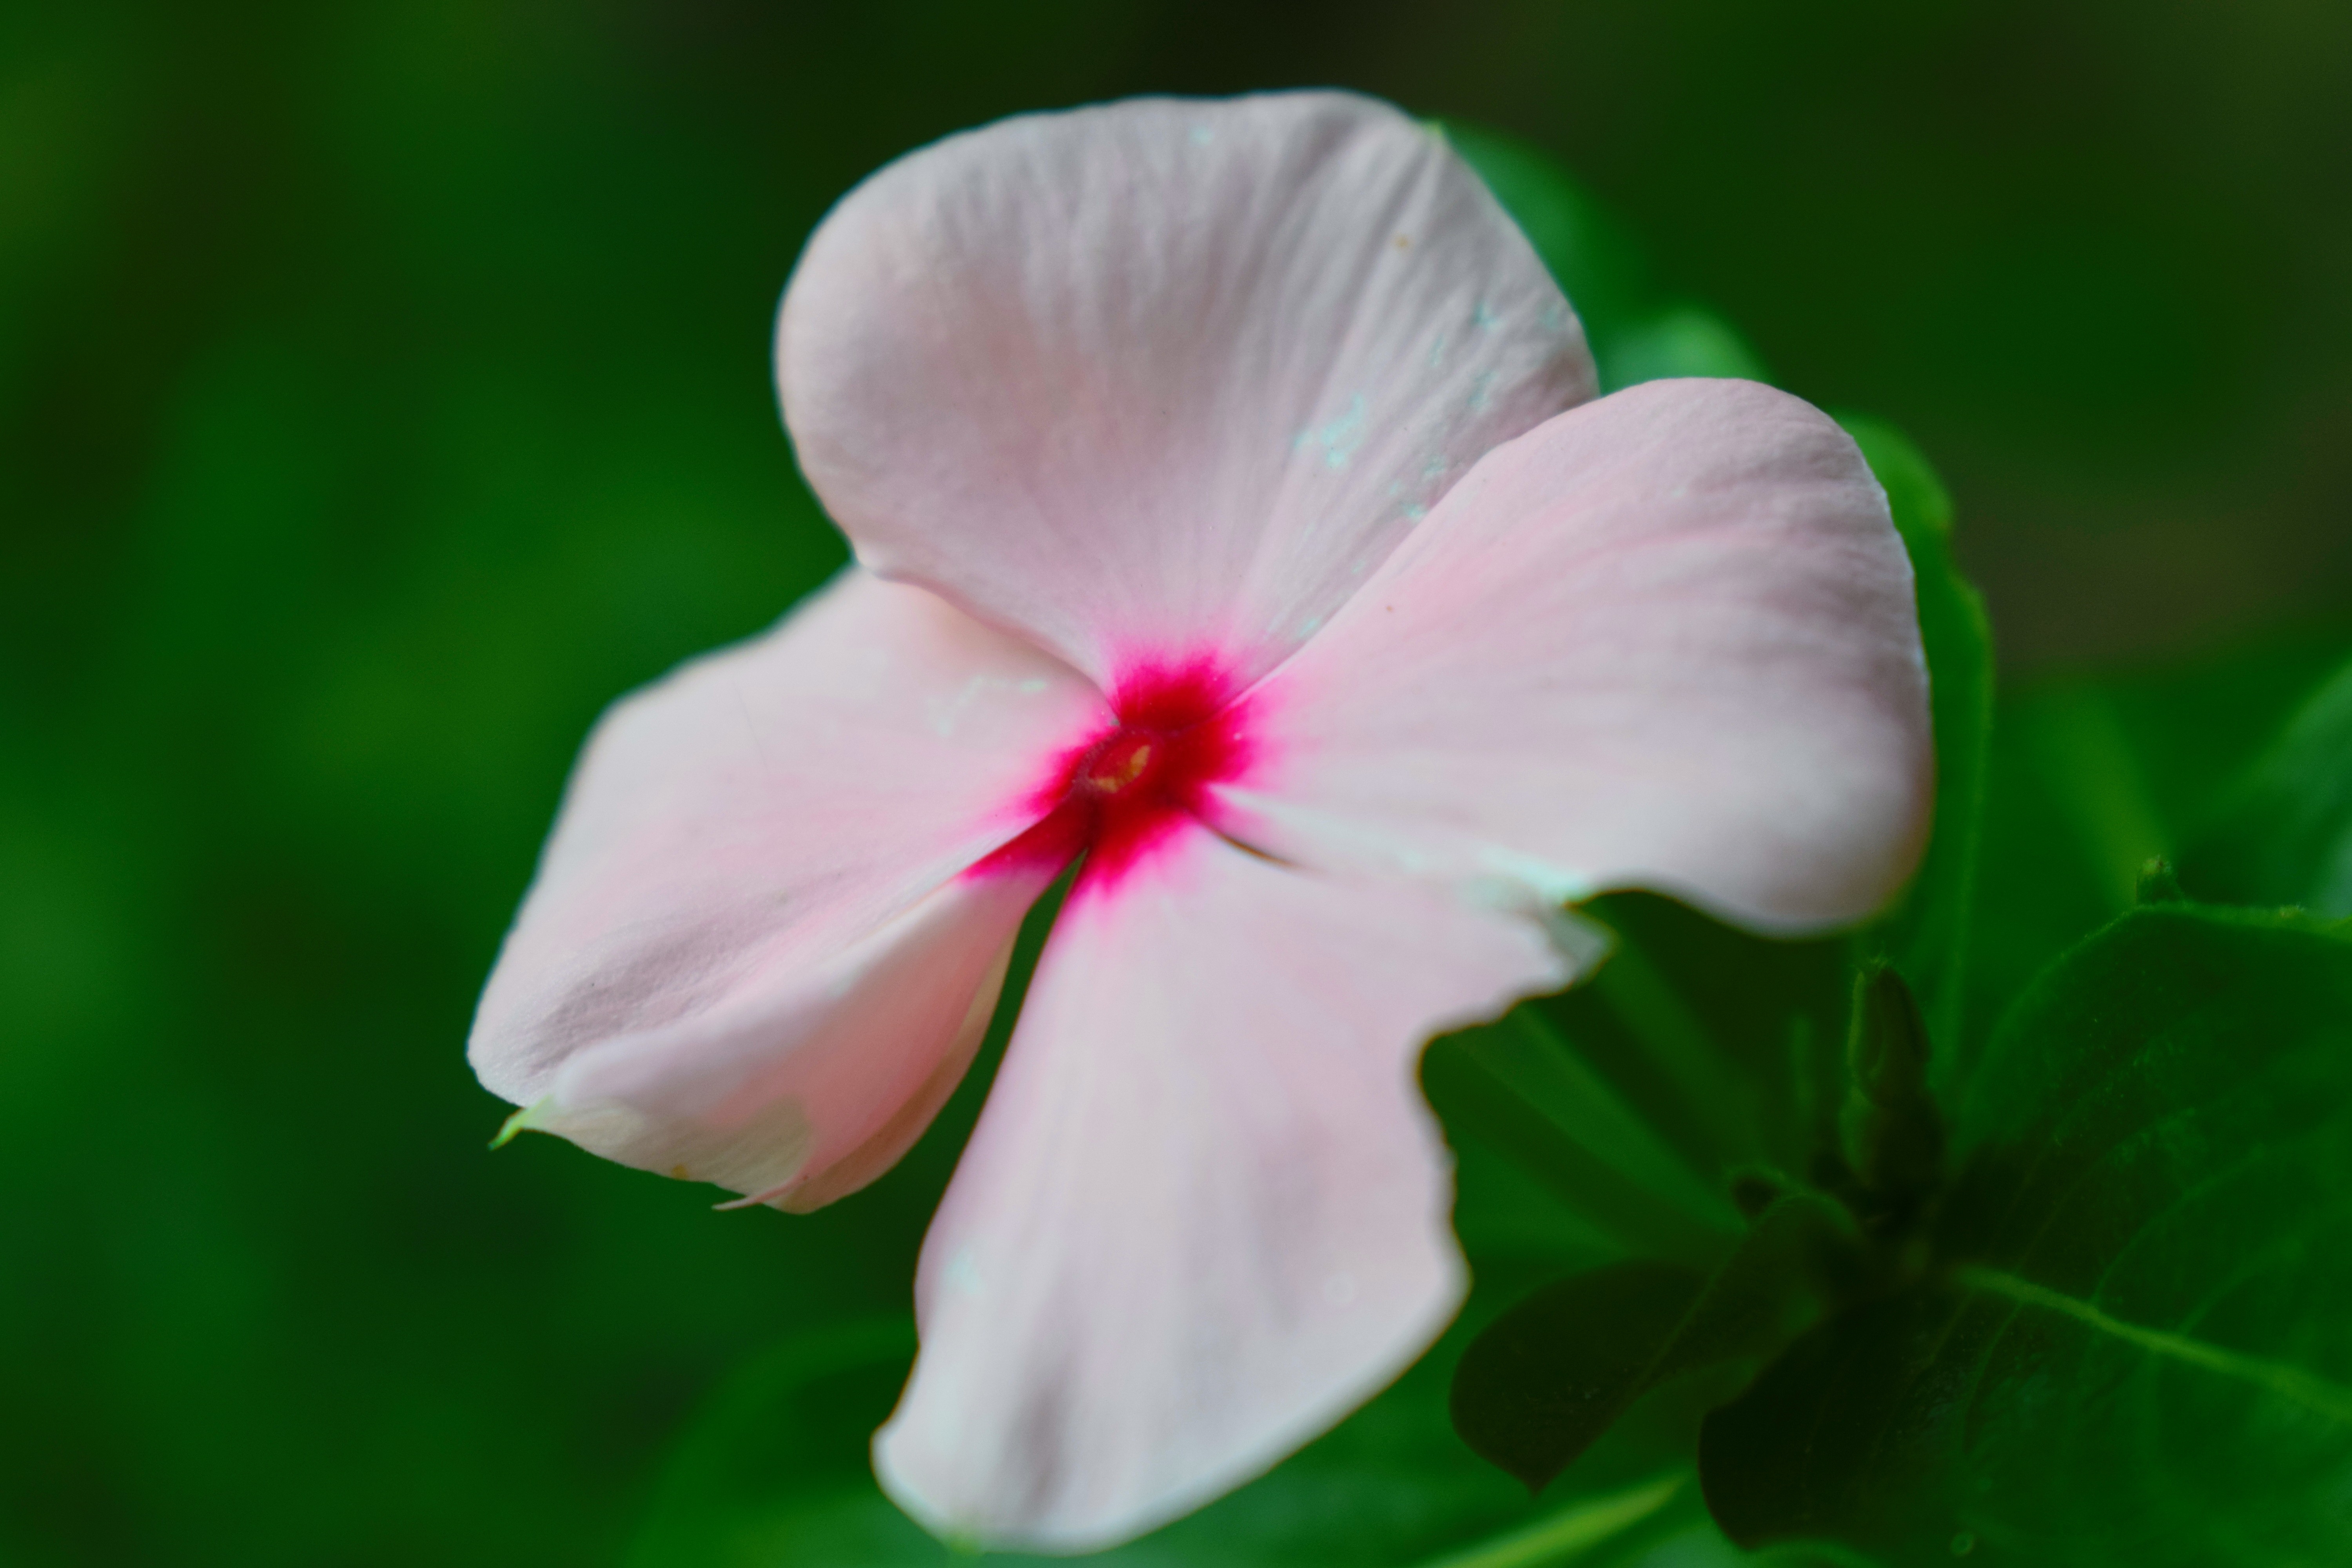 The delicate petals of a pink flower.